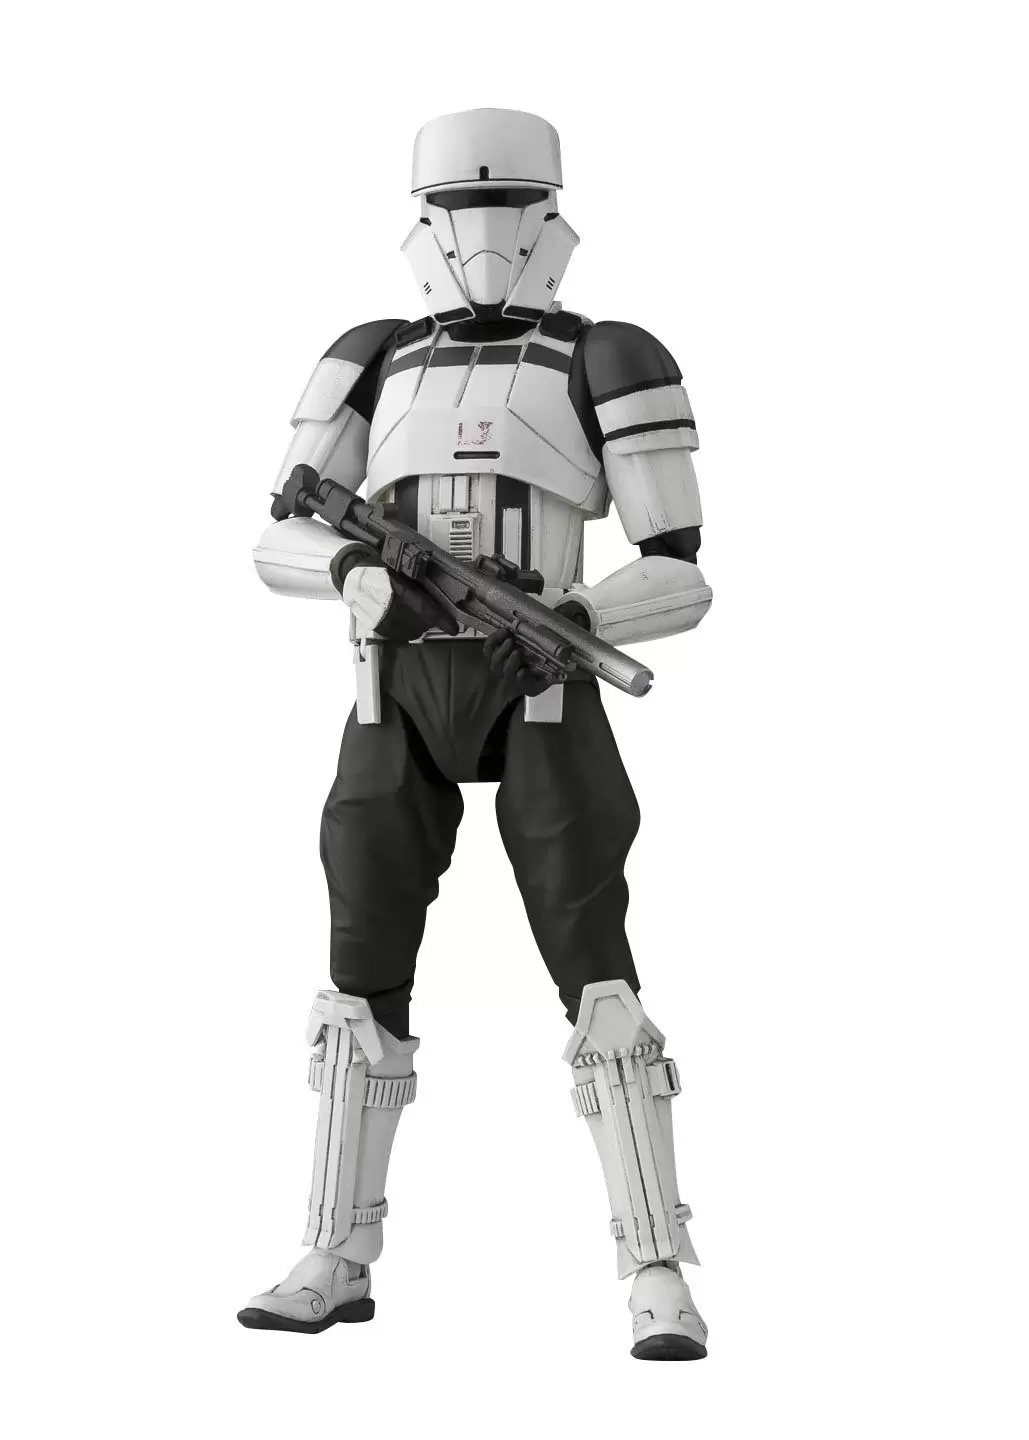 S.H. Figuarts Star Wars - Rogue One - Hover Tank Commander